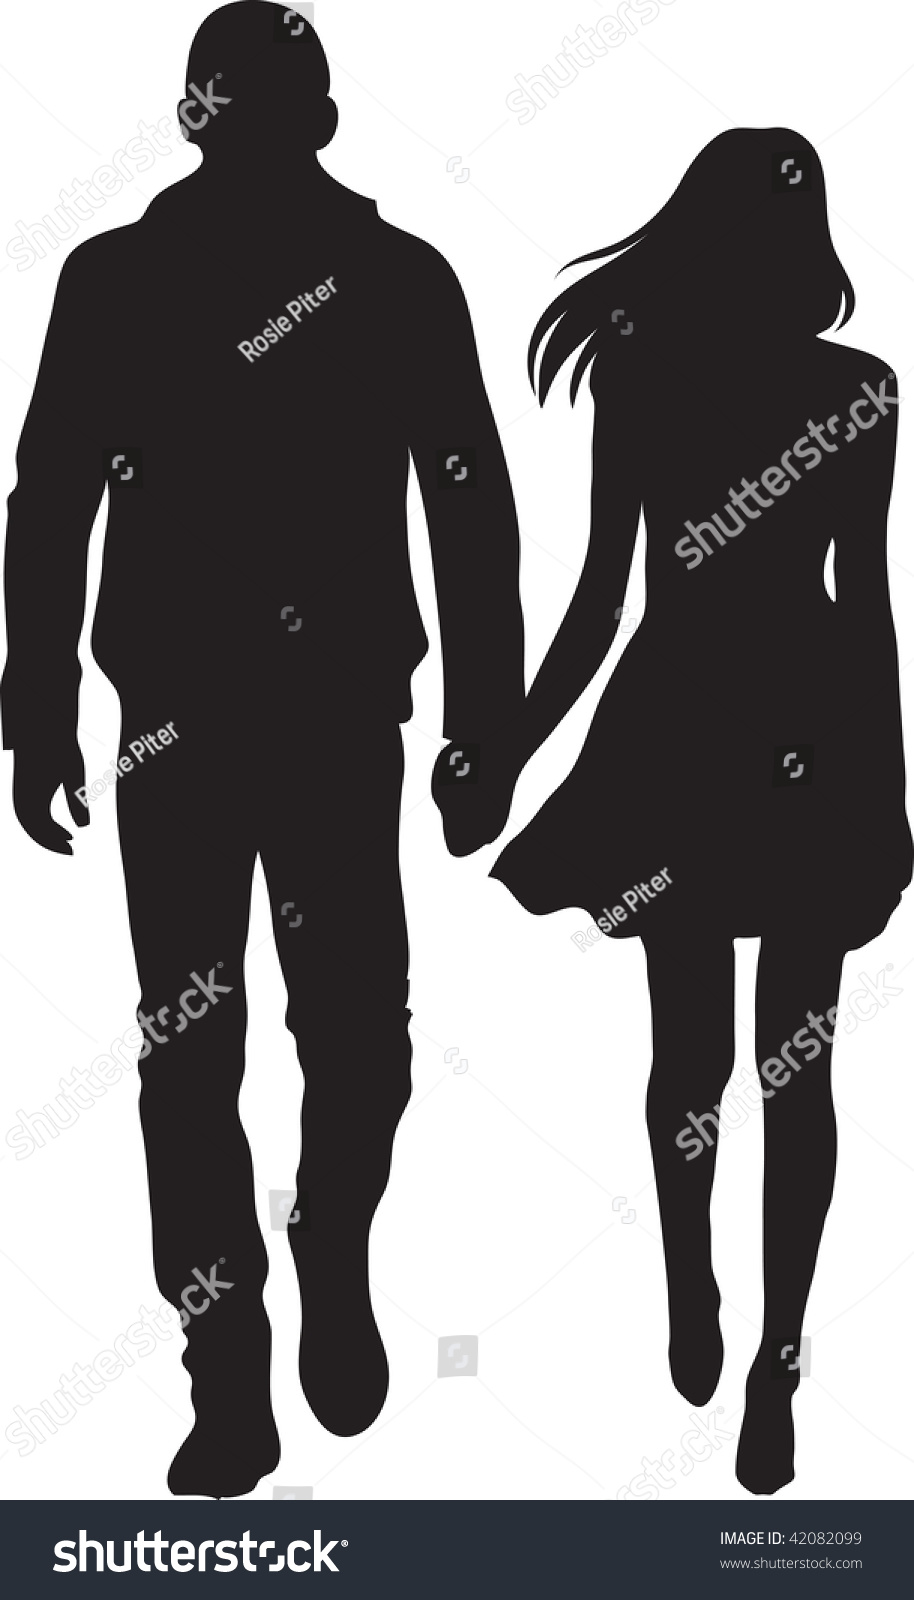 clipart man and woman holding hands - photo #31